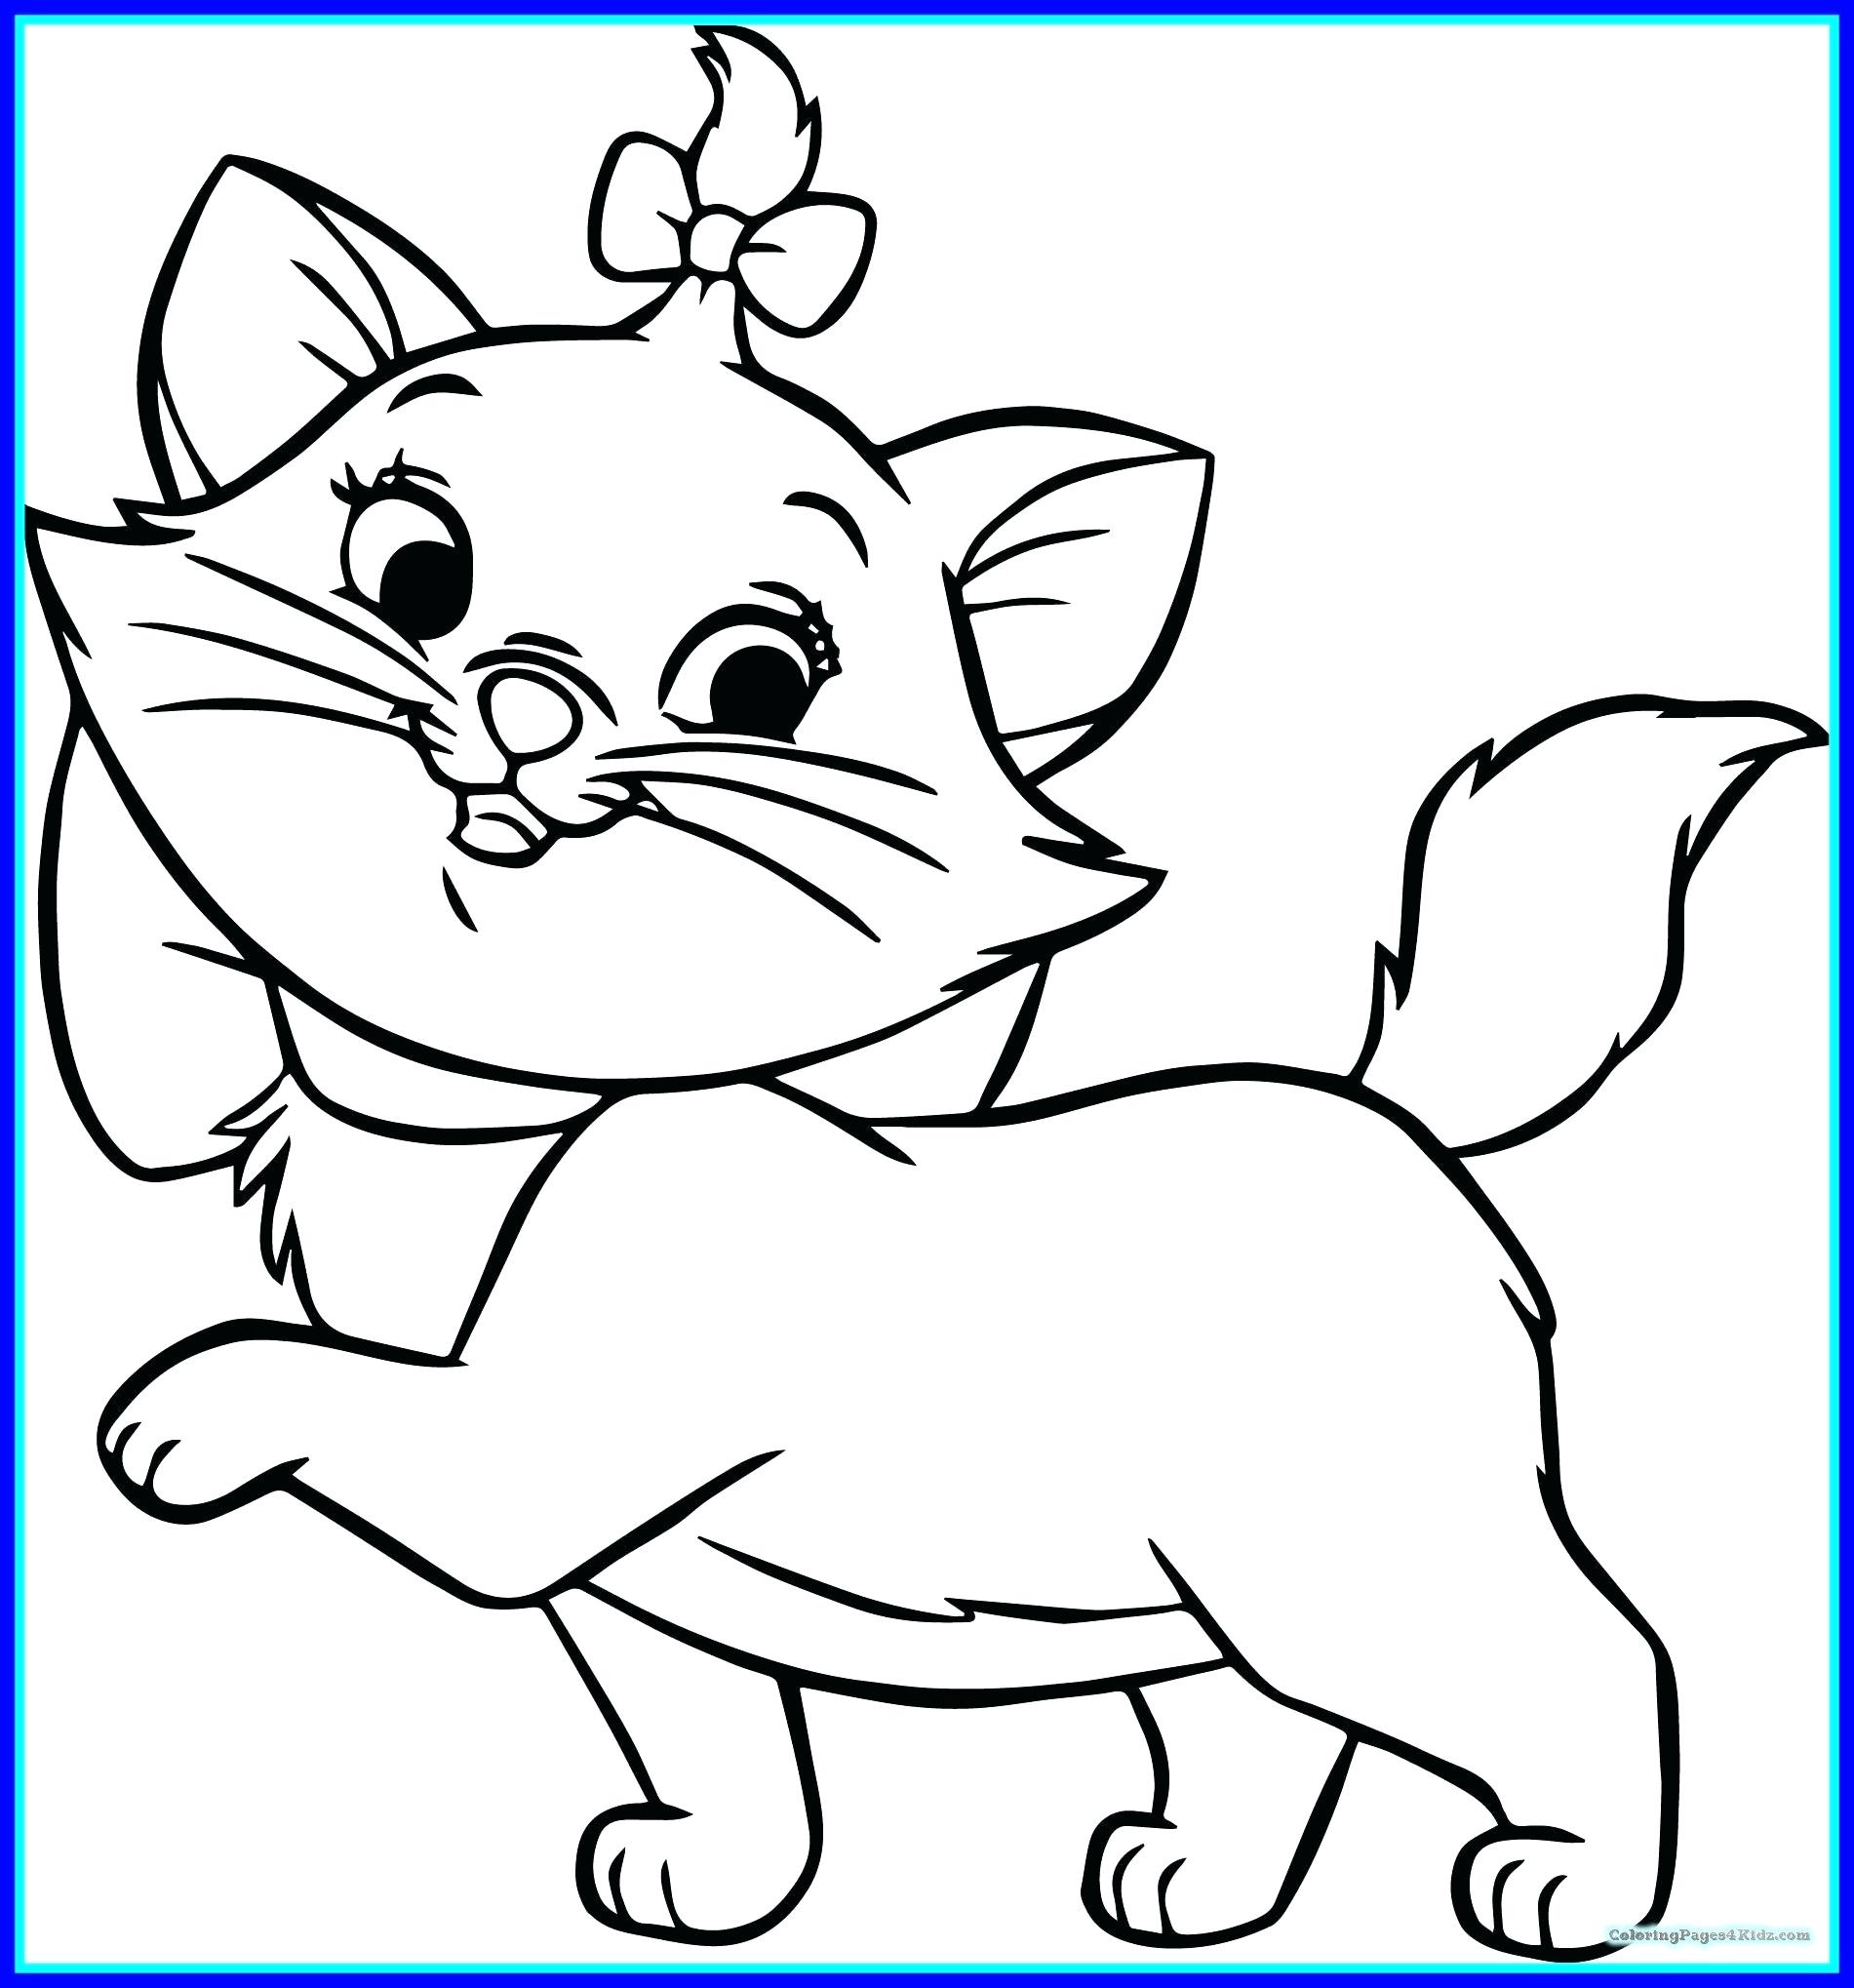 Cute Kittens Coloring Pages   Coloring Home